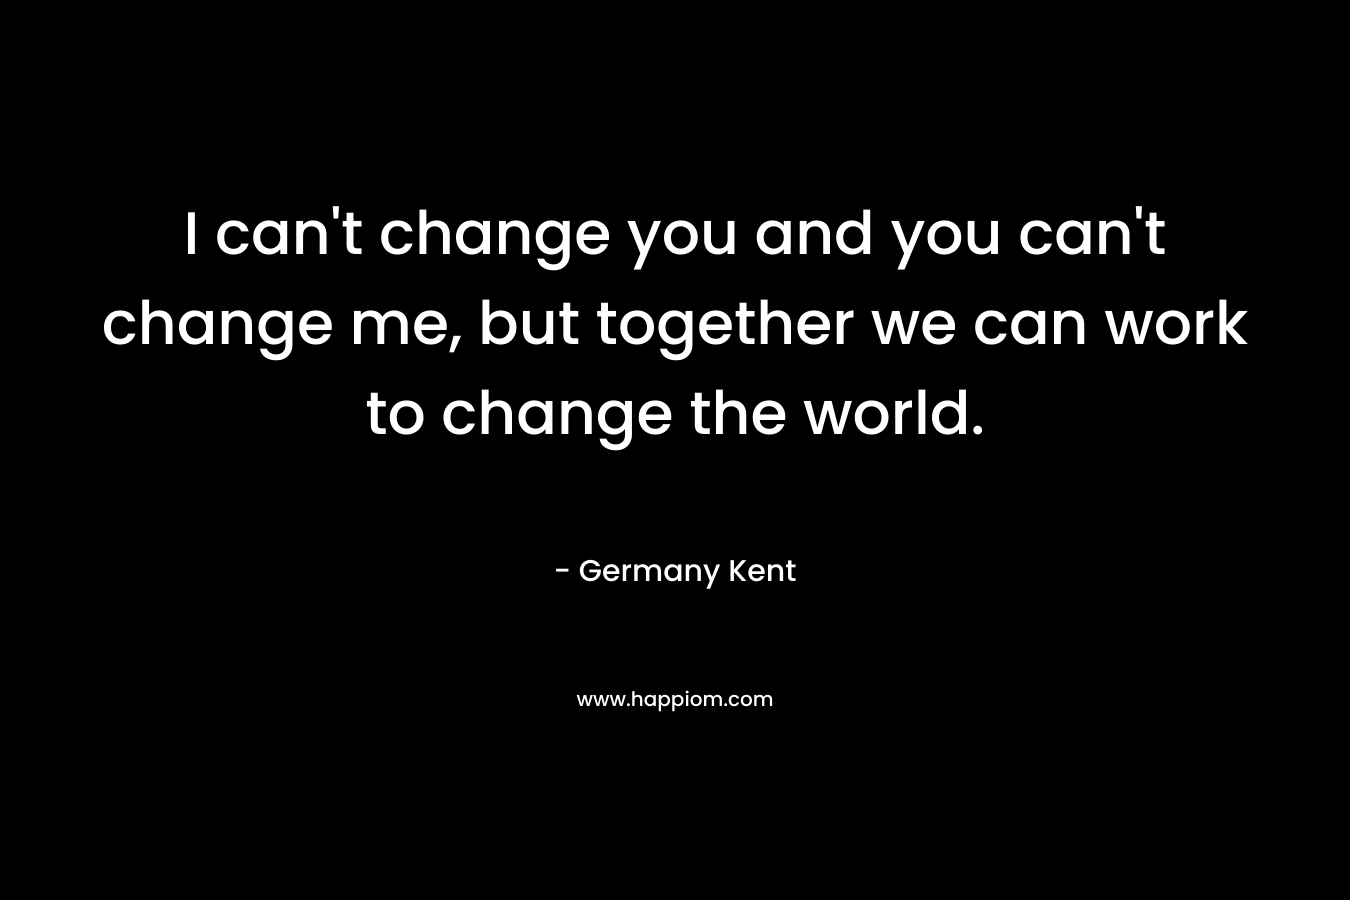 I can’t change you and you can’t change me, but together we can work to change the world. – Germany Kent